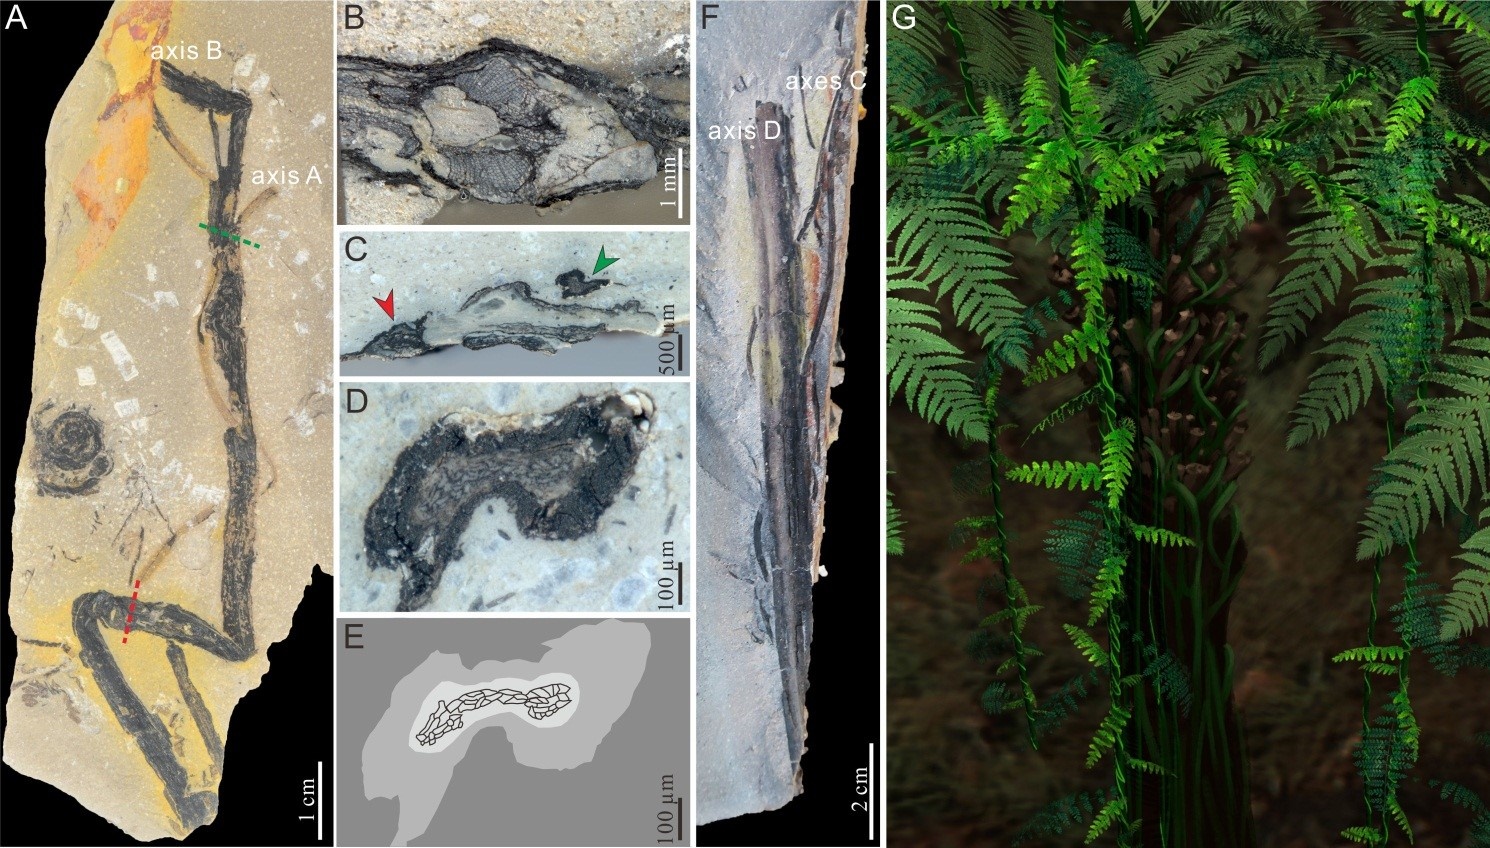 Researchers found a left-handed fern twiner in a Permian swamp forest